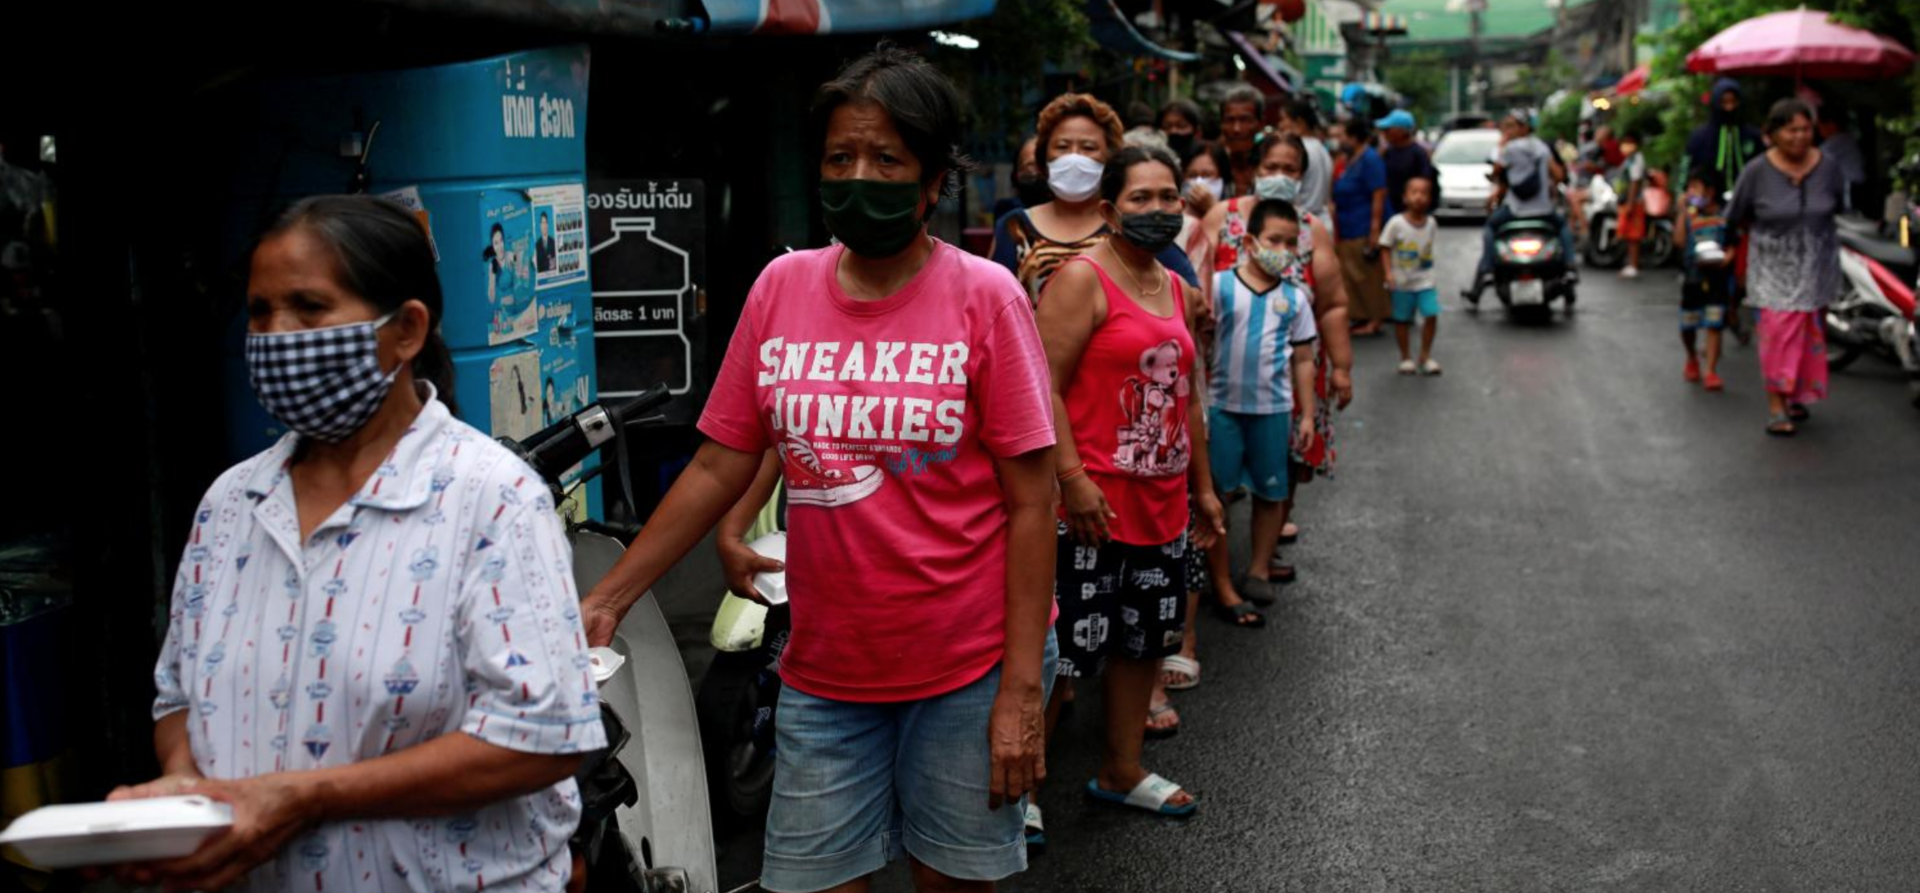 People line up for free food in a slum area following the coronavirus outbreak. Photo: Reuters